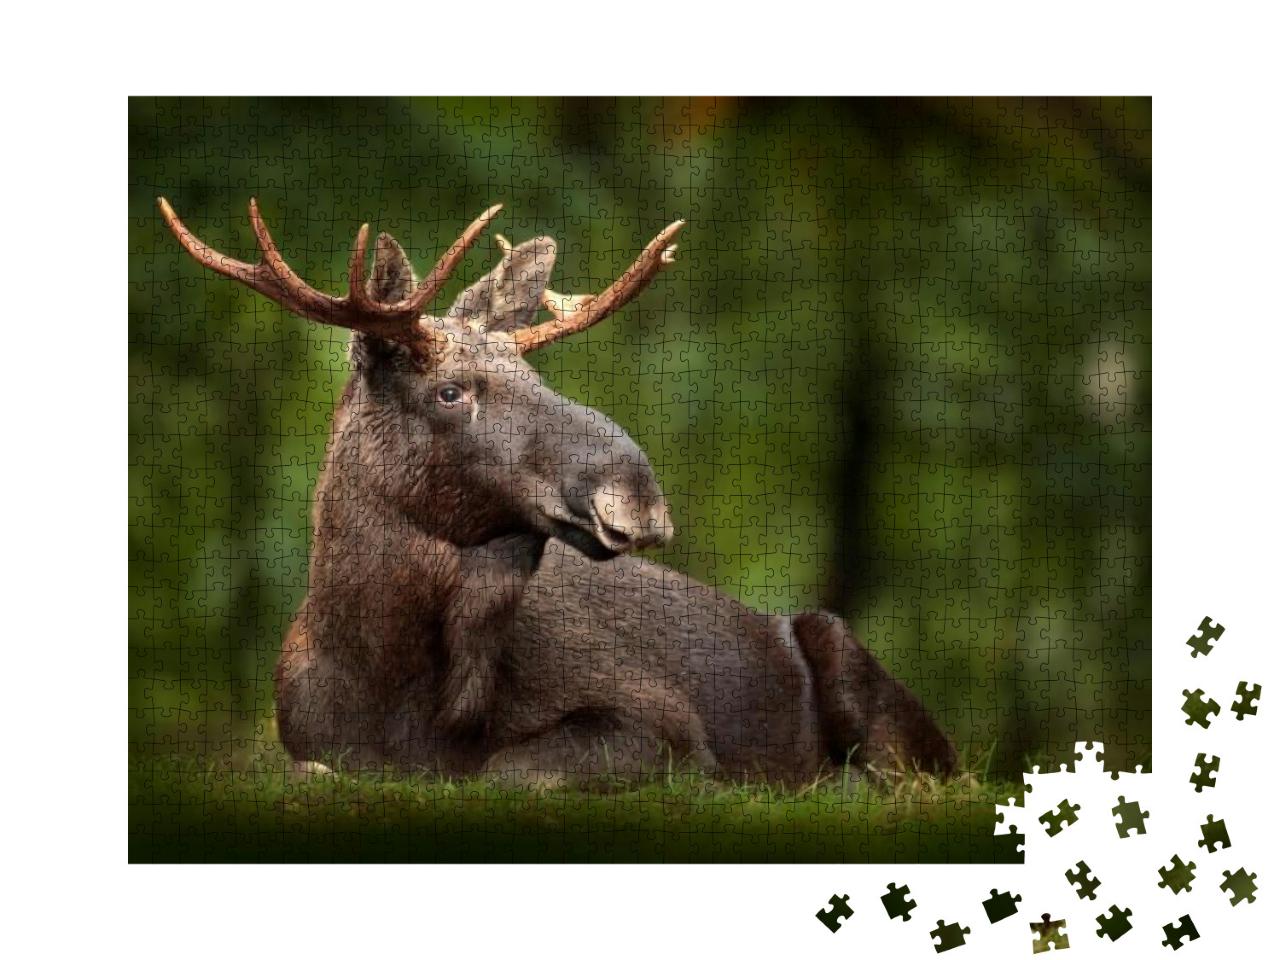 Elk or Moose, Alces Alces in the Dark Forest During Rainy... Jigsaw Puzzle with 1000 pieces